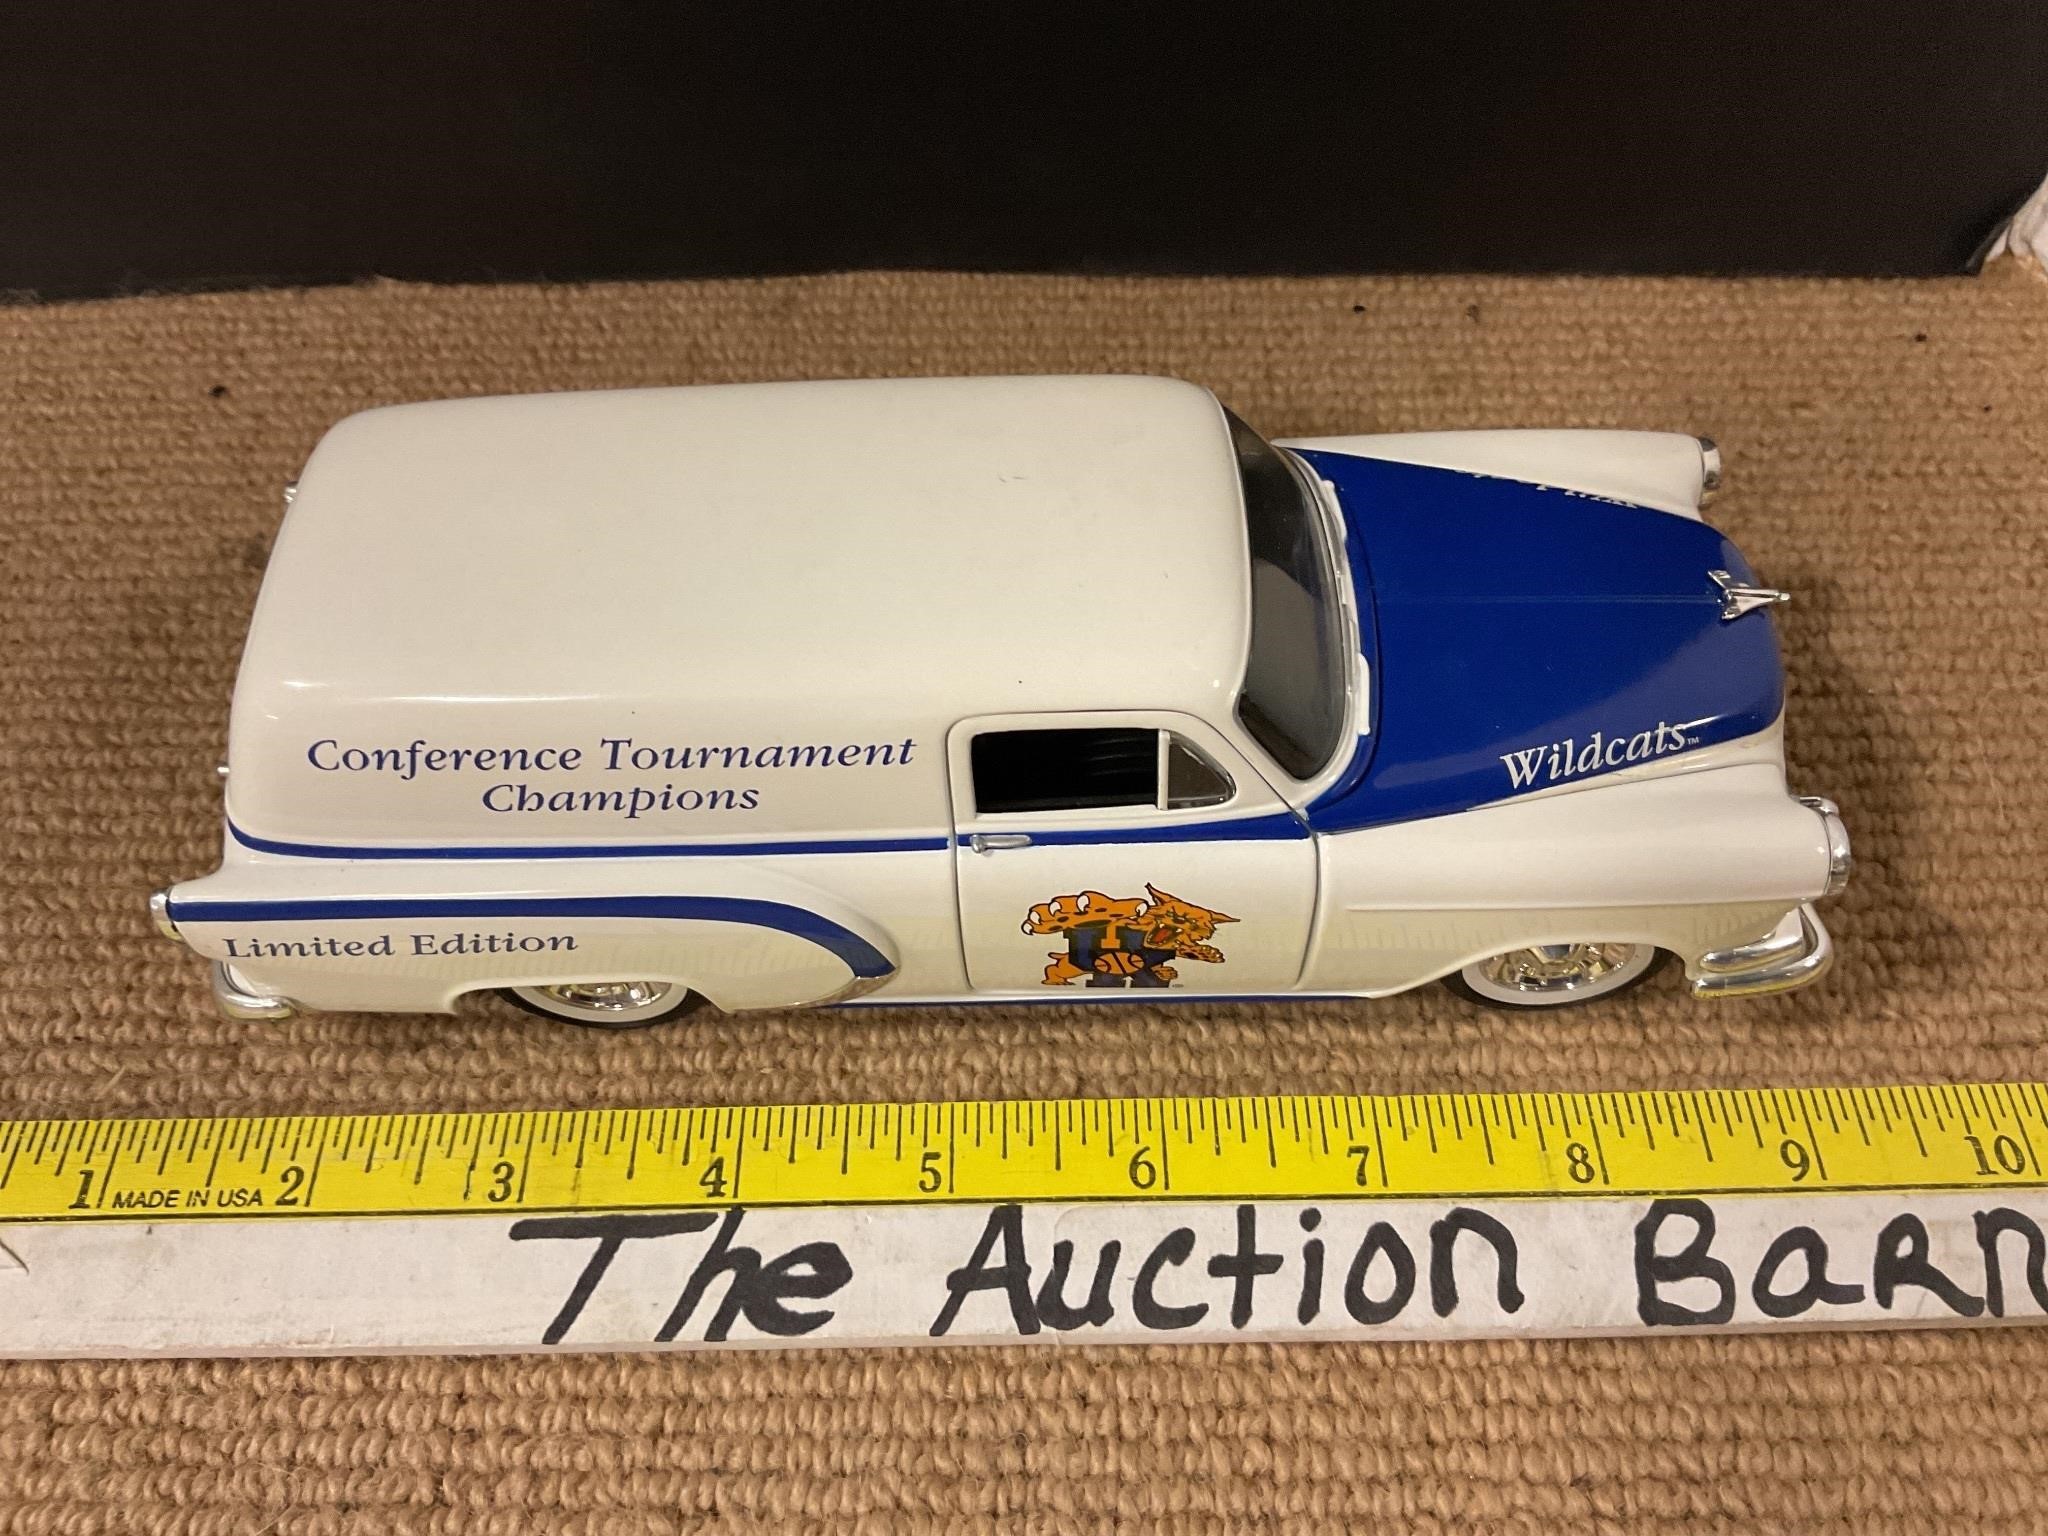 Kentucky conference tournament champions car bank